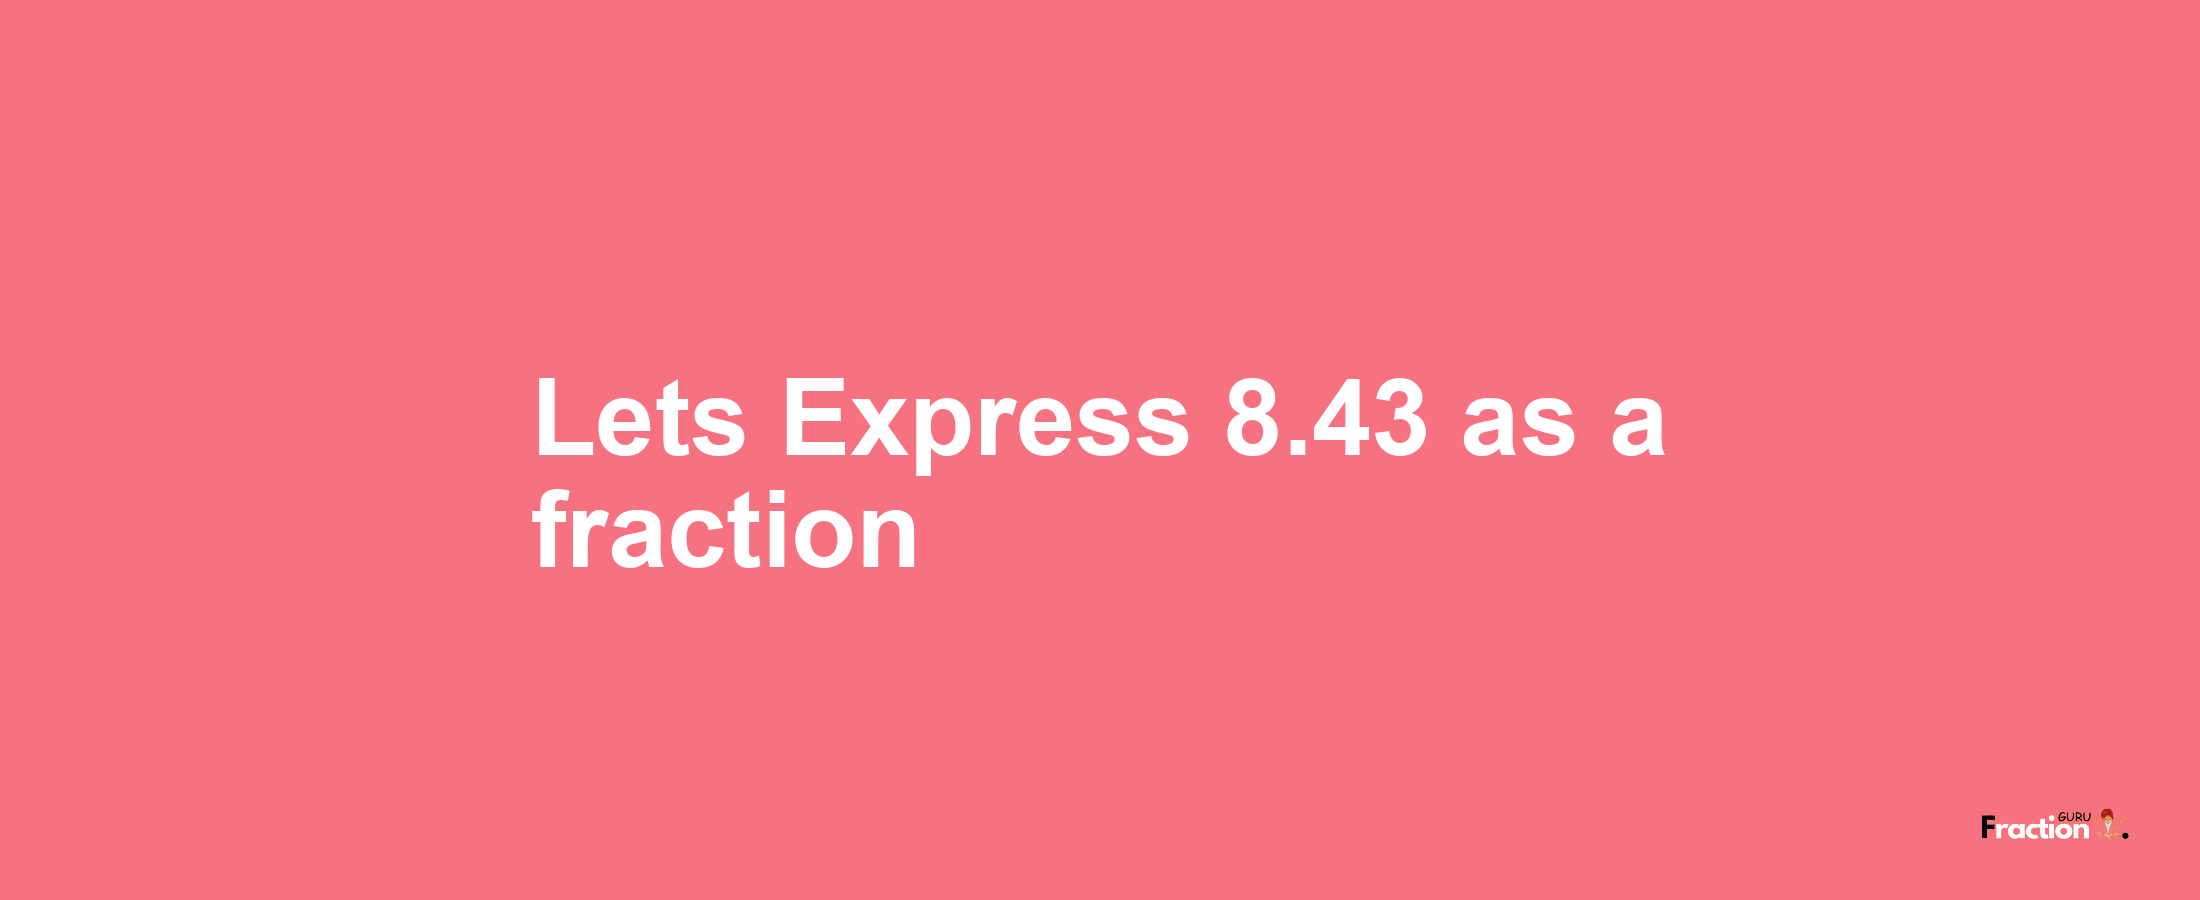 Lets Express 8.43 as afraction